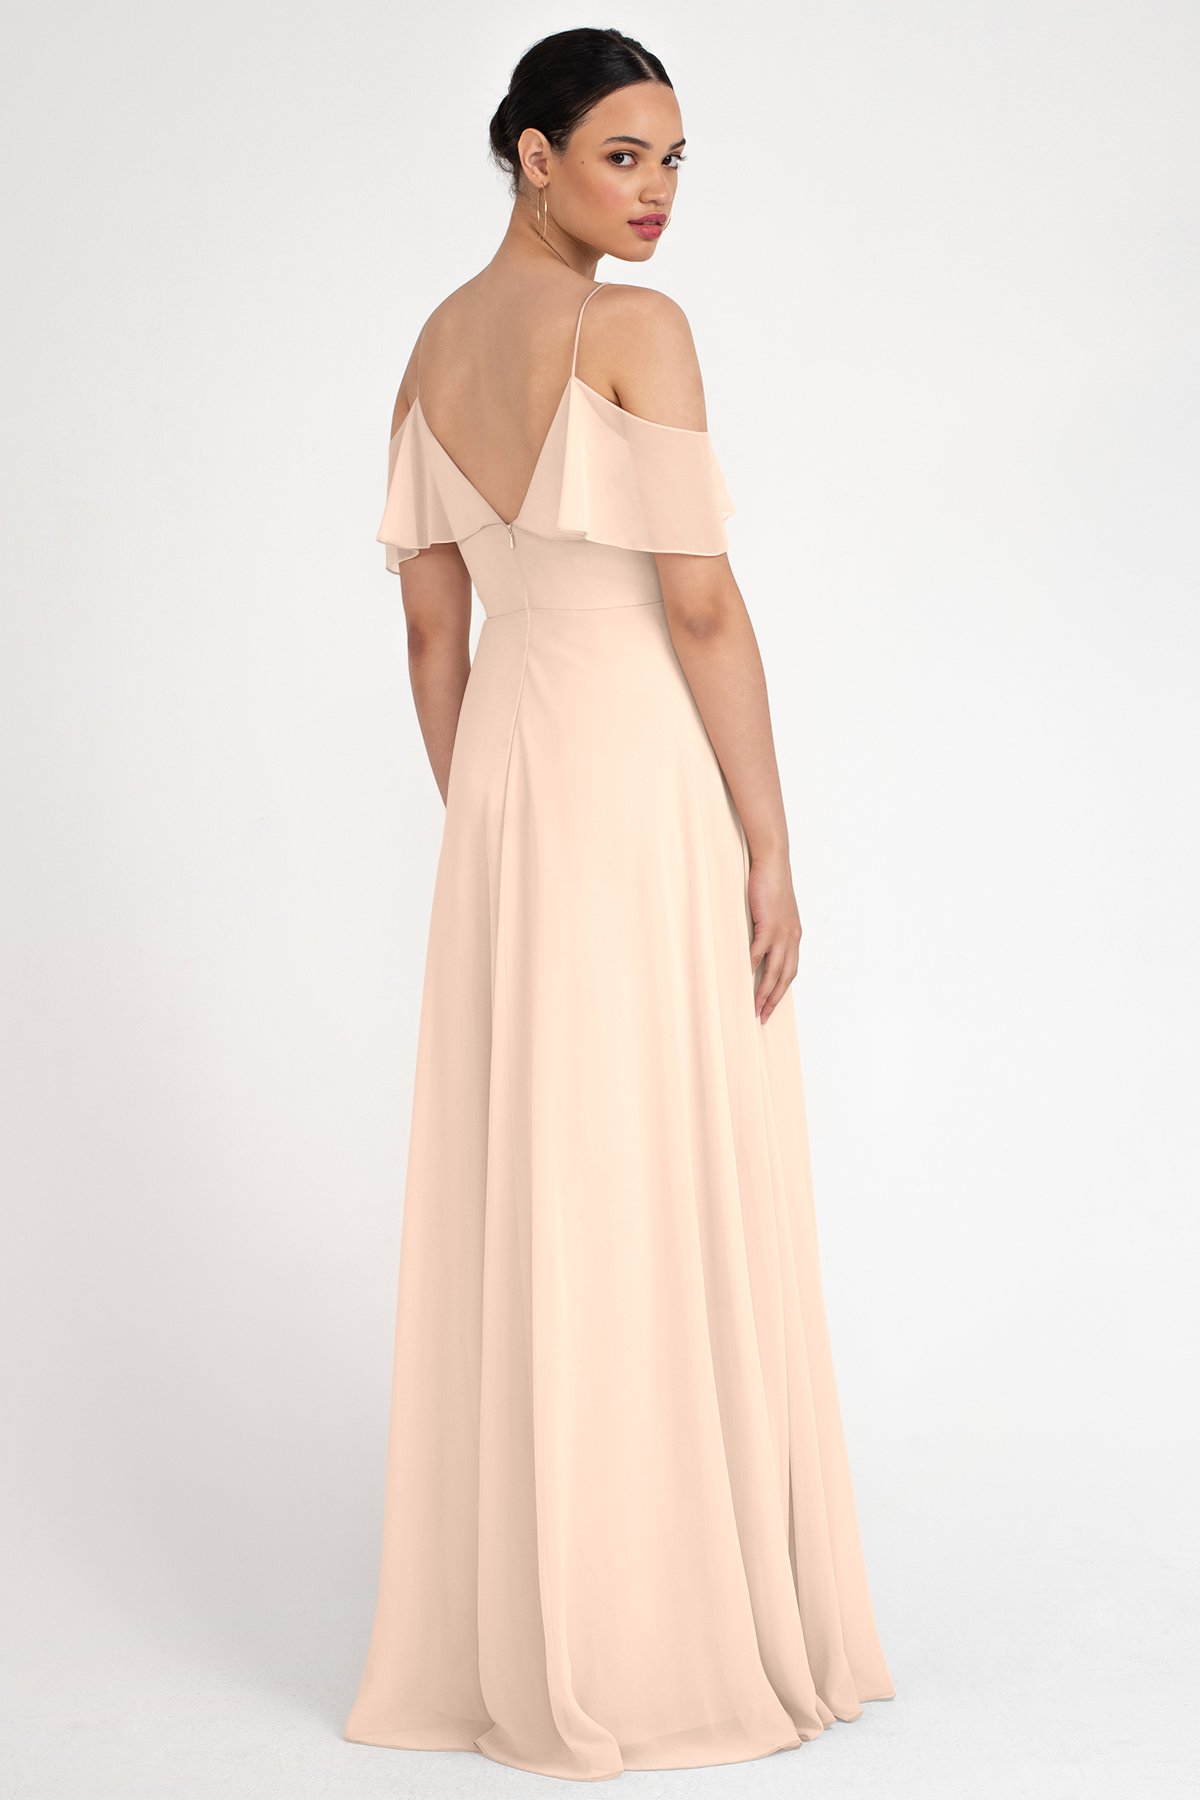 jenny yoo mila cold shoulder gown